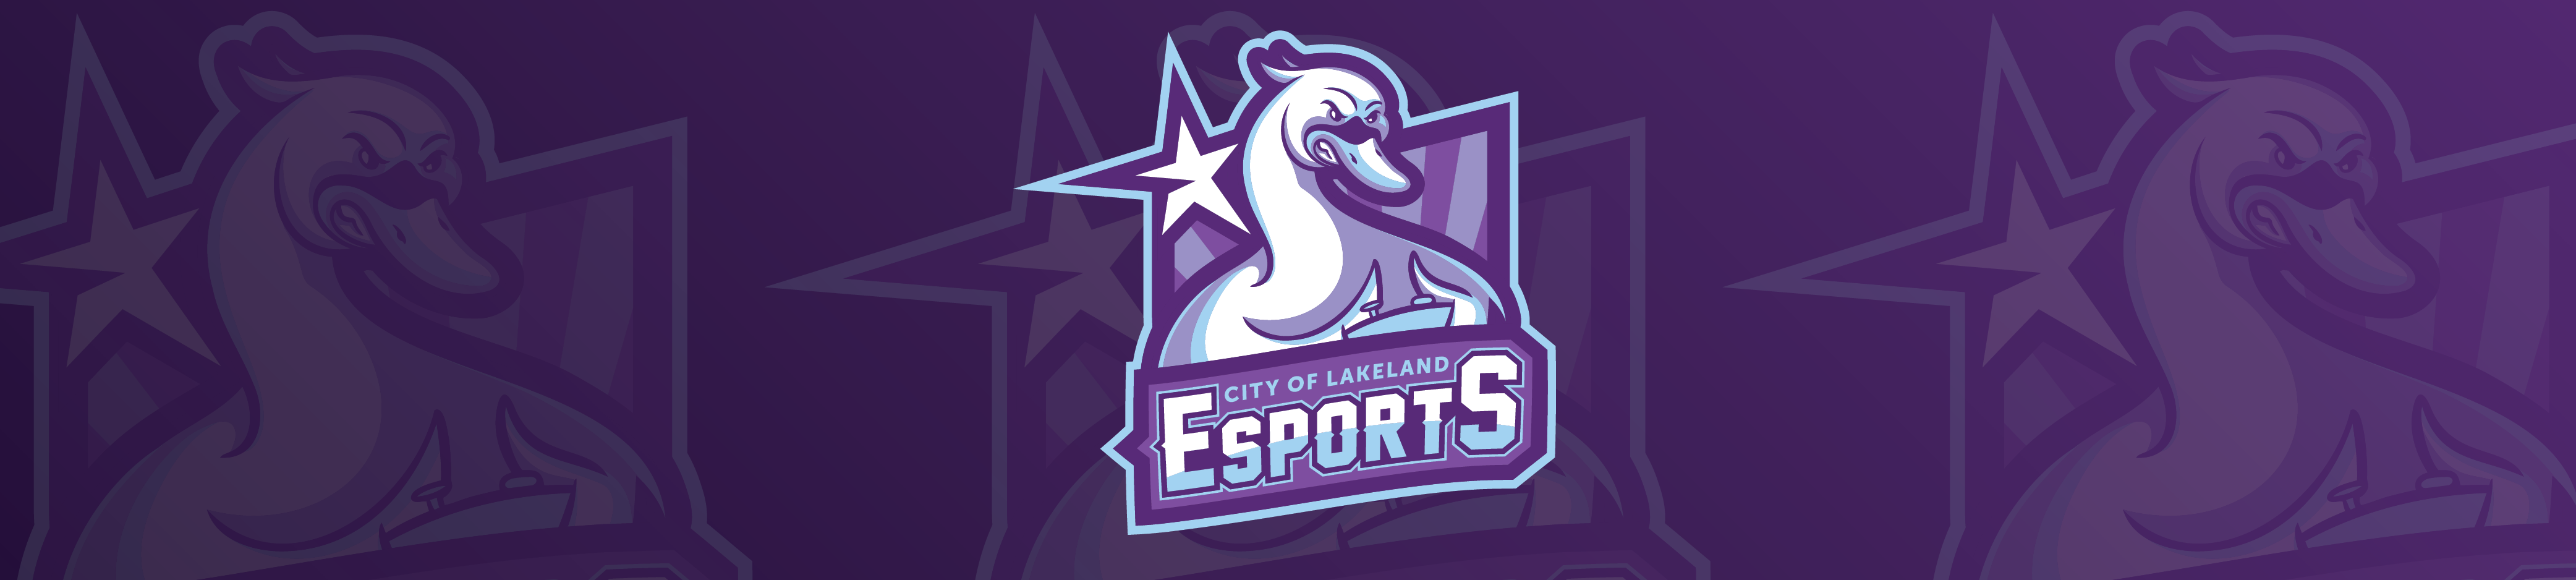 Web Banner - City of Lakeland eSports logo. Purple with a swan holding a game controller